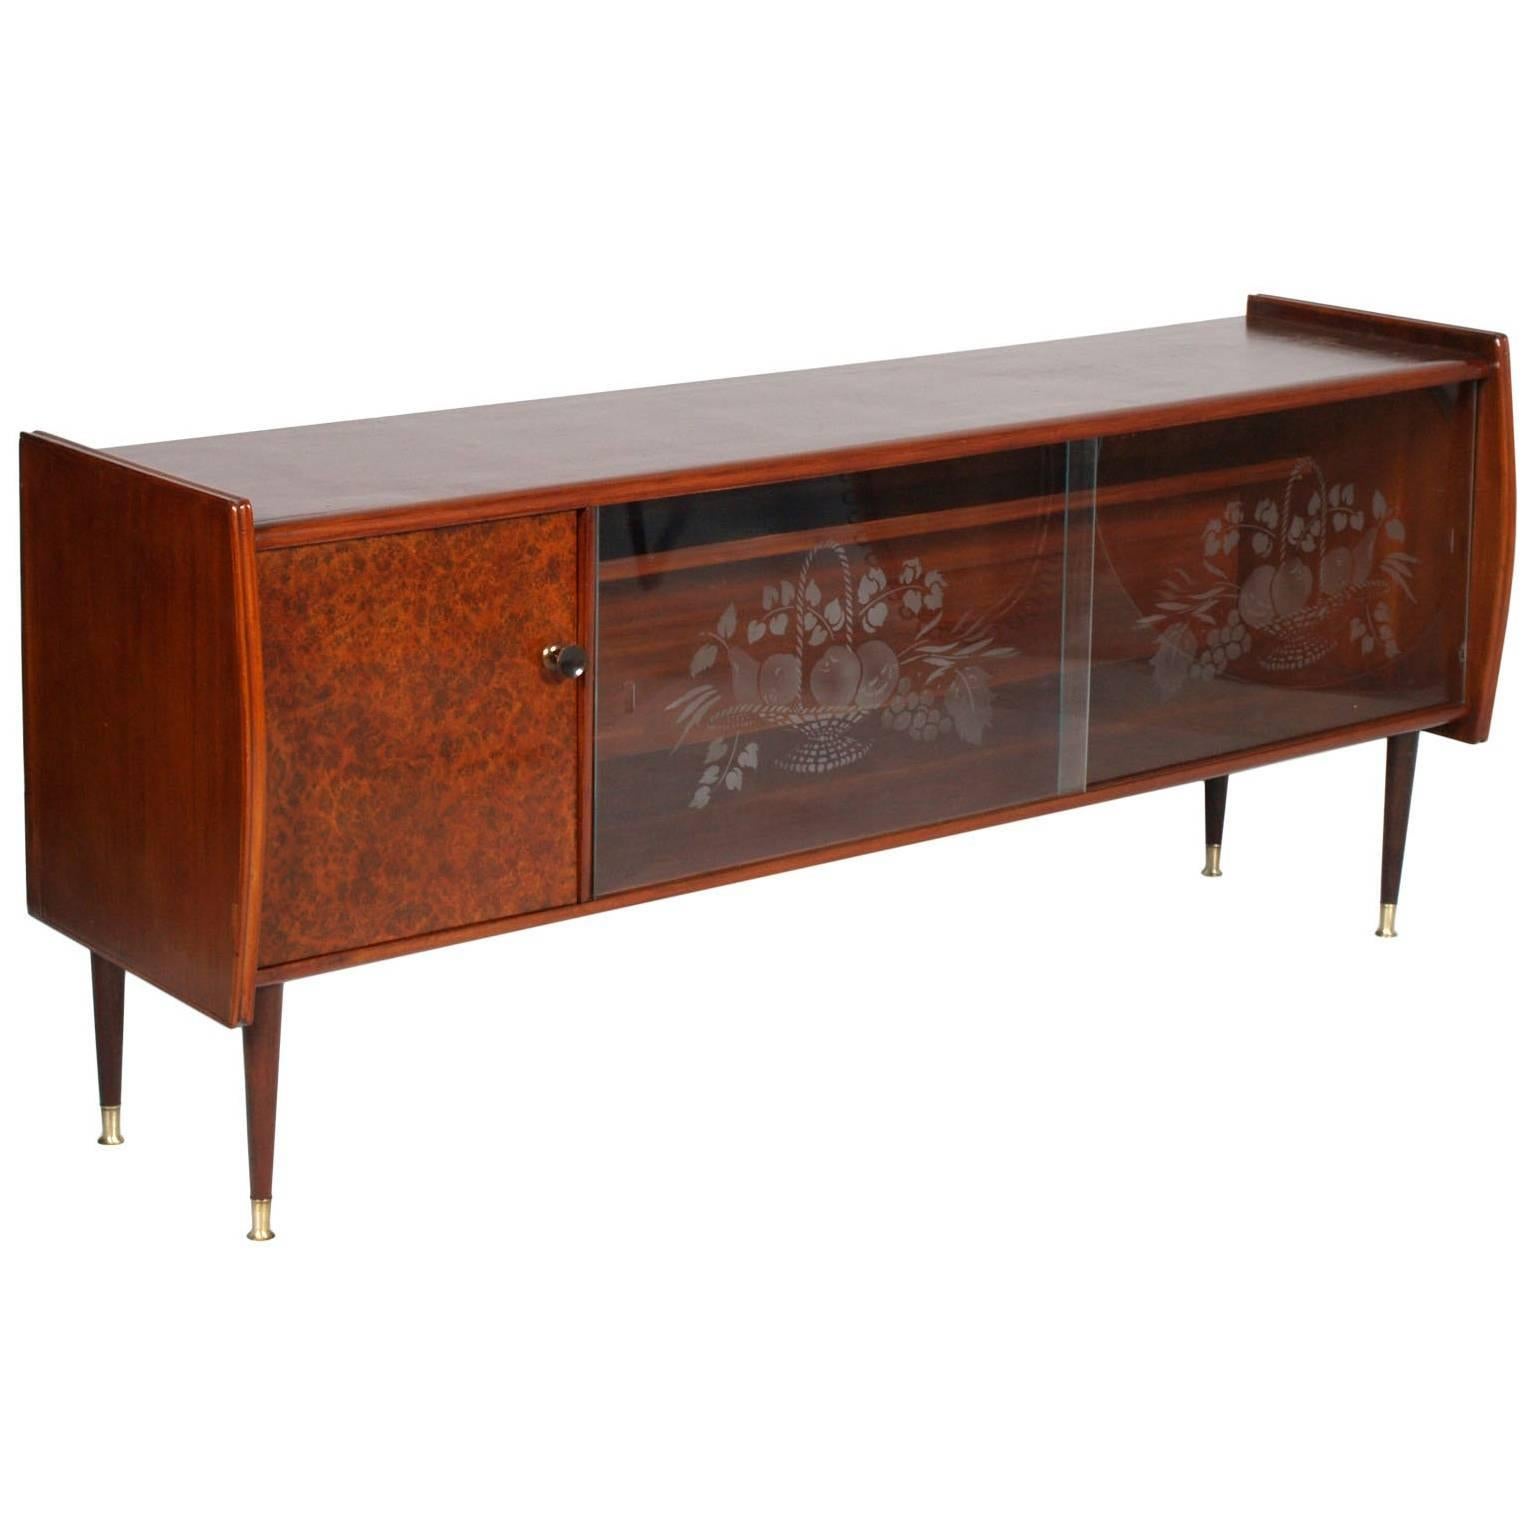 Midcentury Cabinet Art Deco from Lissone, Made in Milan, Gio Ponti Style For Sale